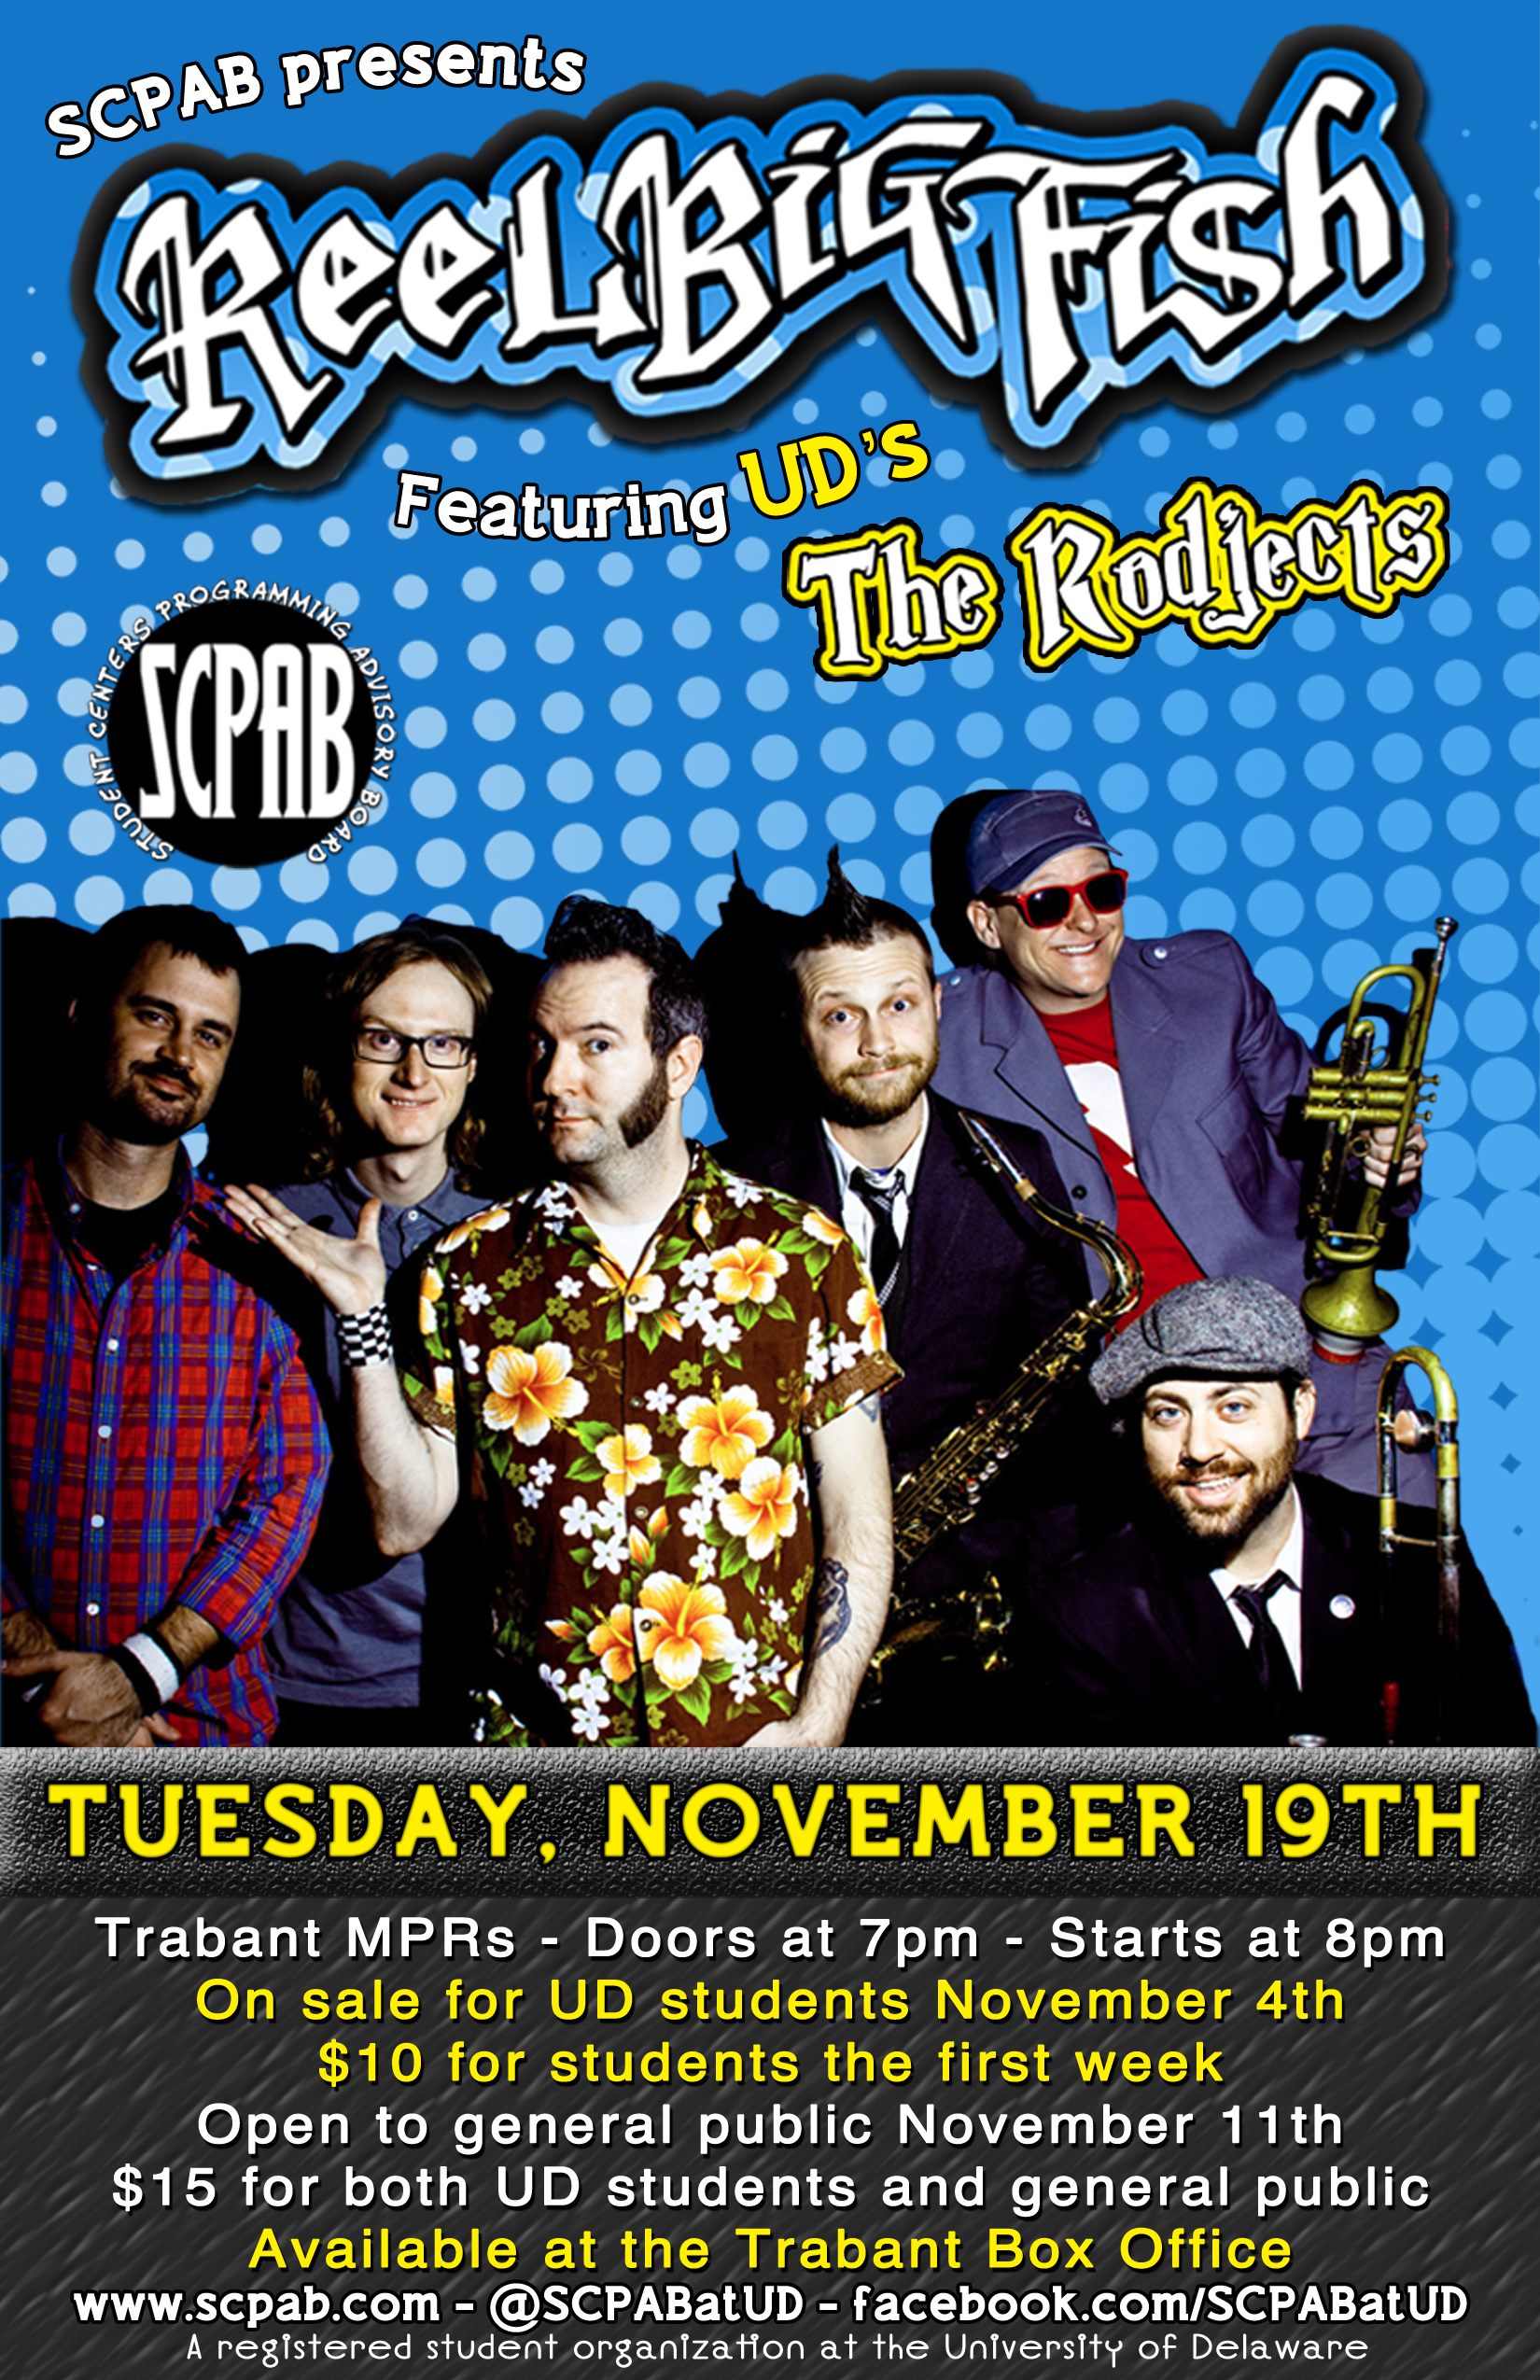 SCPAB to present concert featuring ska band Reel Big Fish